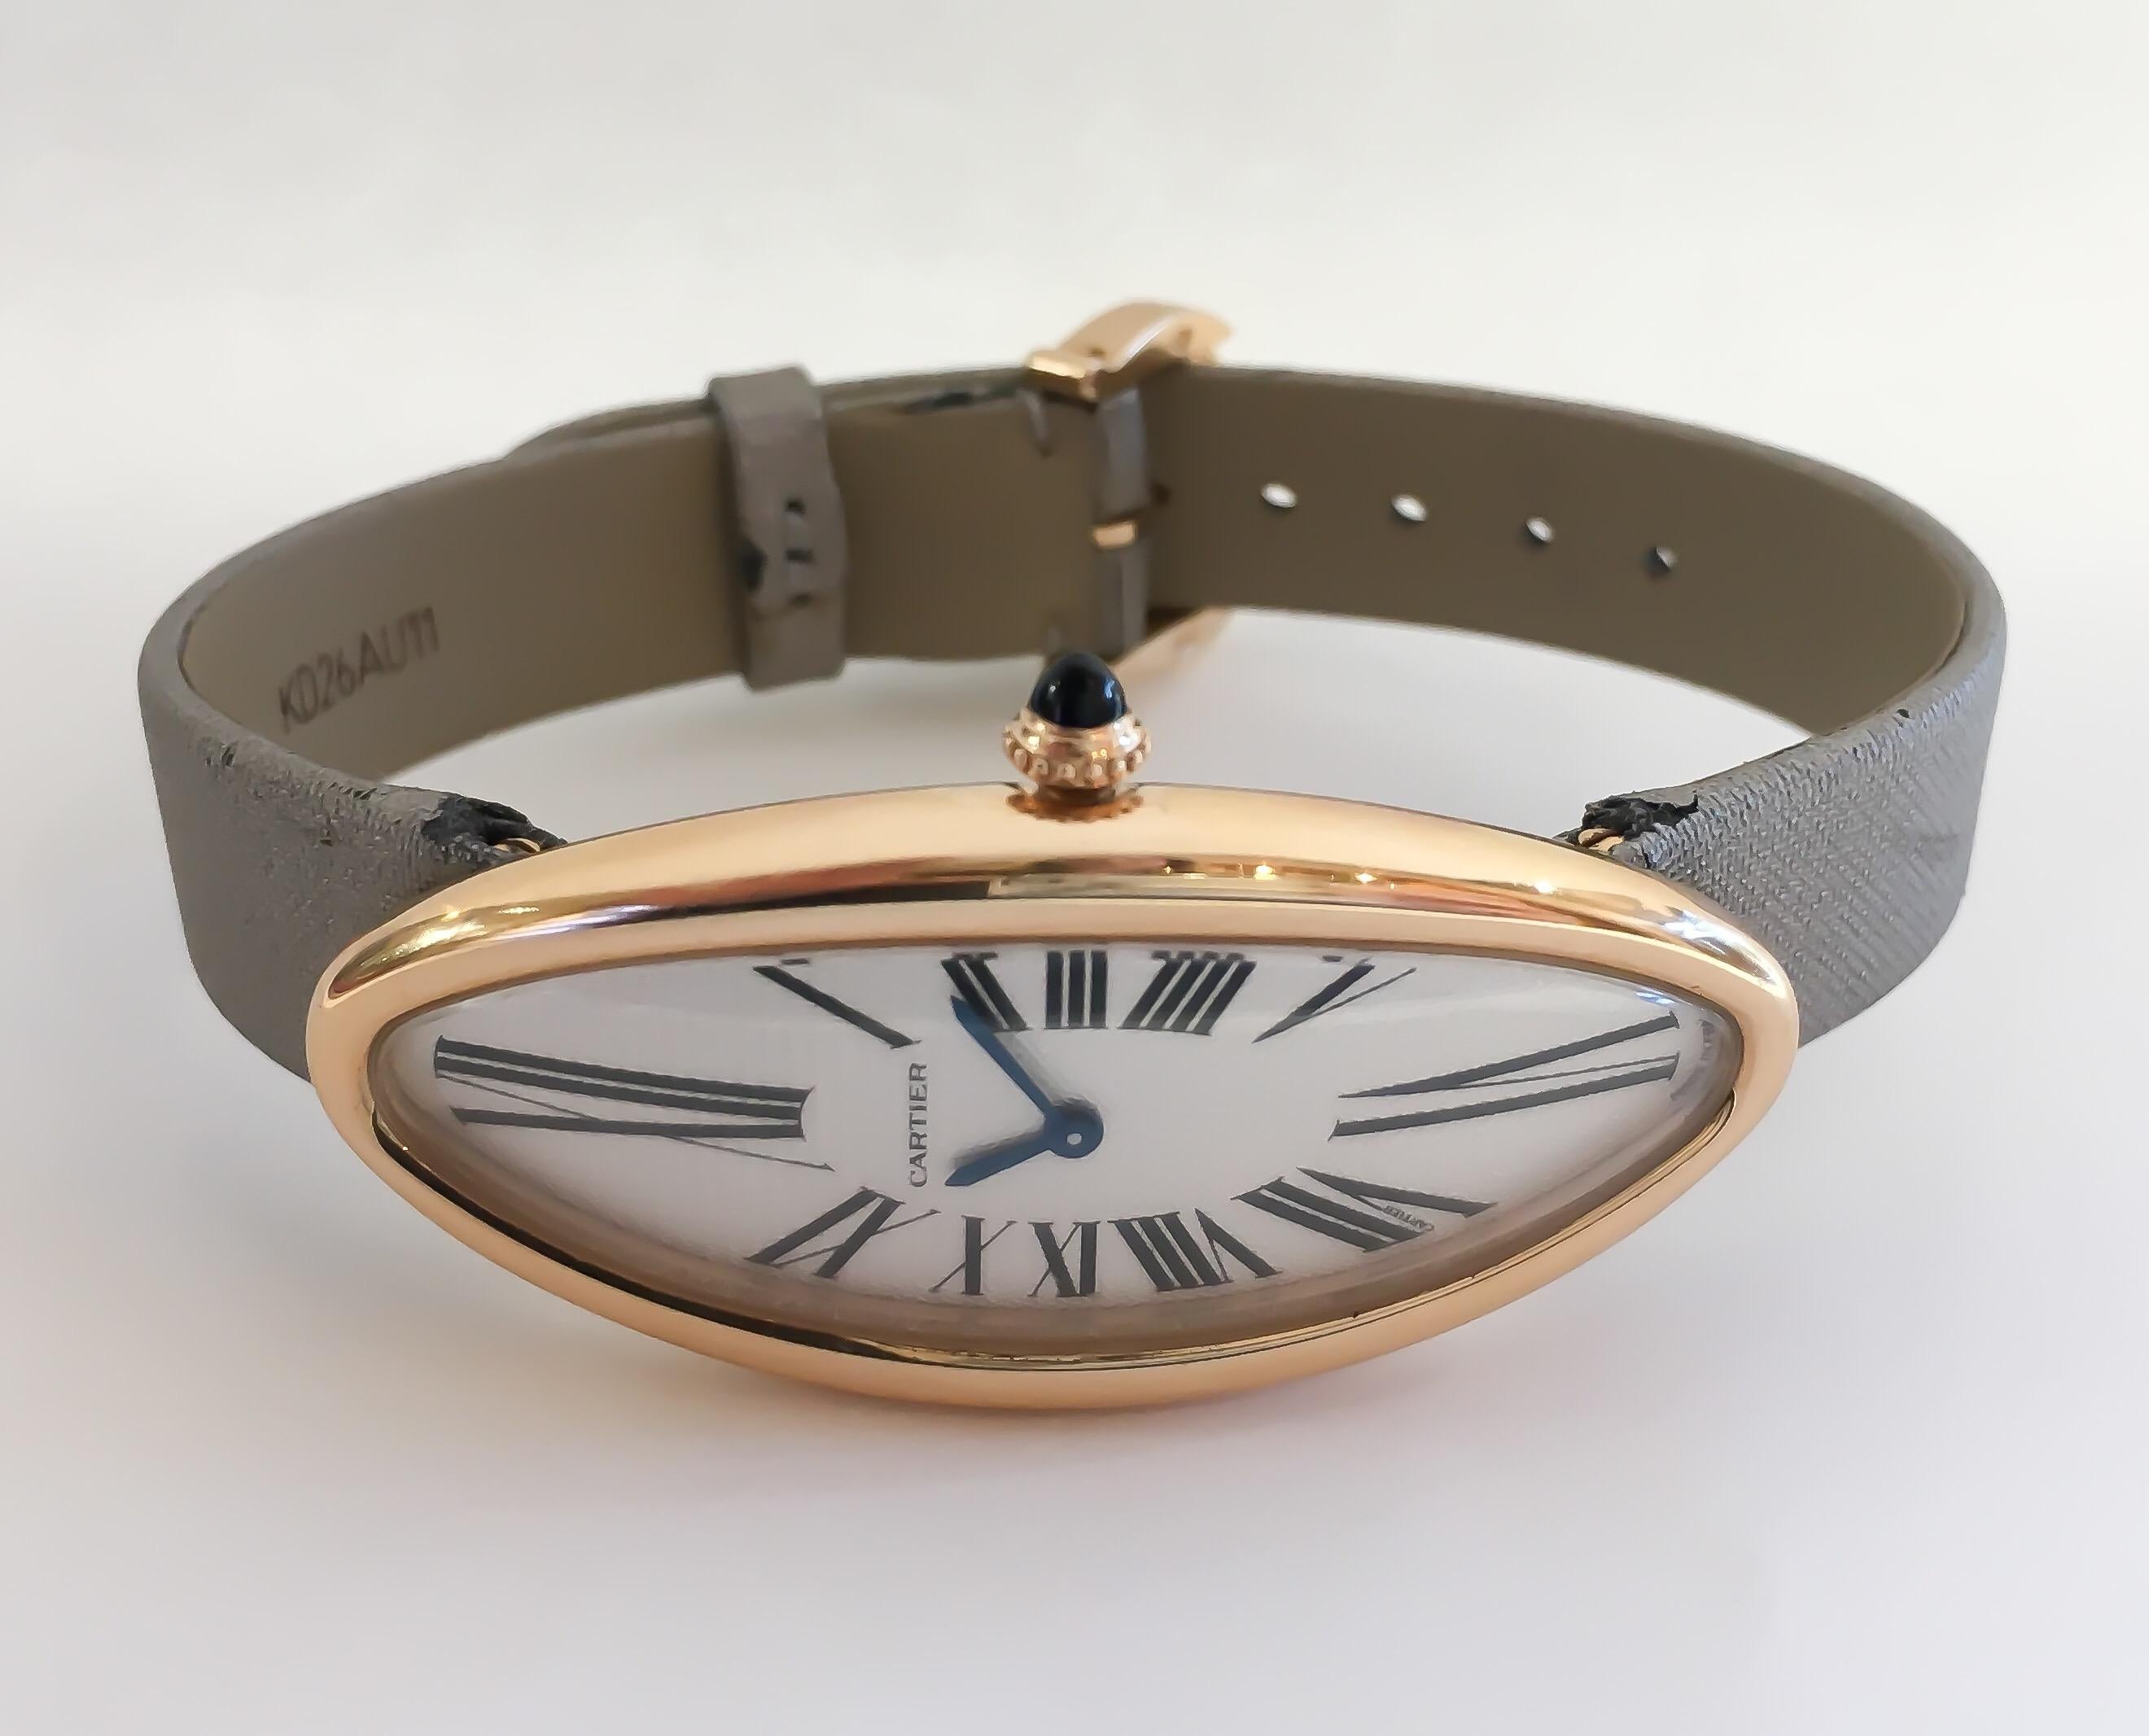 This is a rare Cartier timepiece designed in premium 18 karat rose gold. Baignoire Allongee is a discontinued model, very hard to find. It is in excellent condition with some wear on the satin leather strap. The strap can be ordered/replaced at a